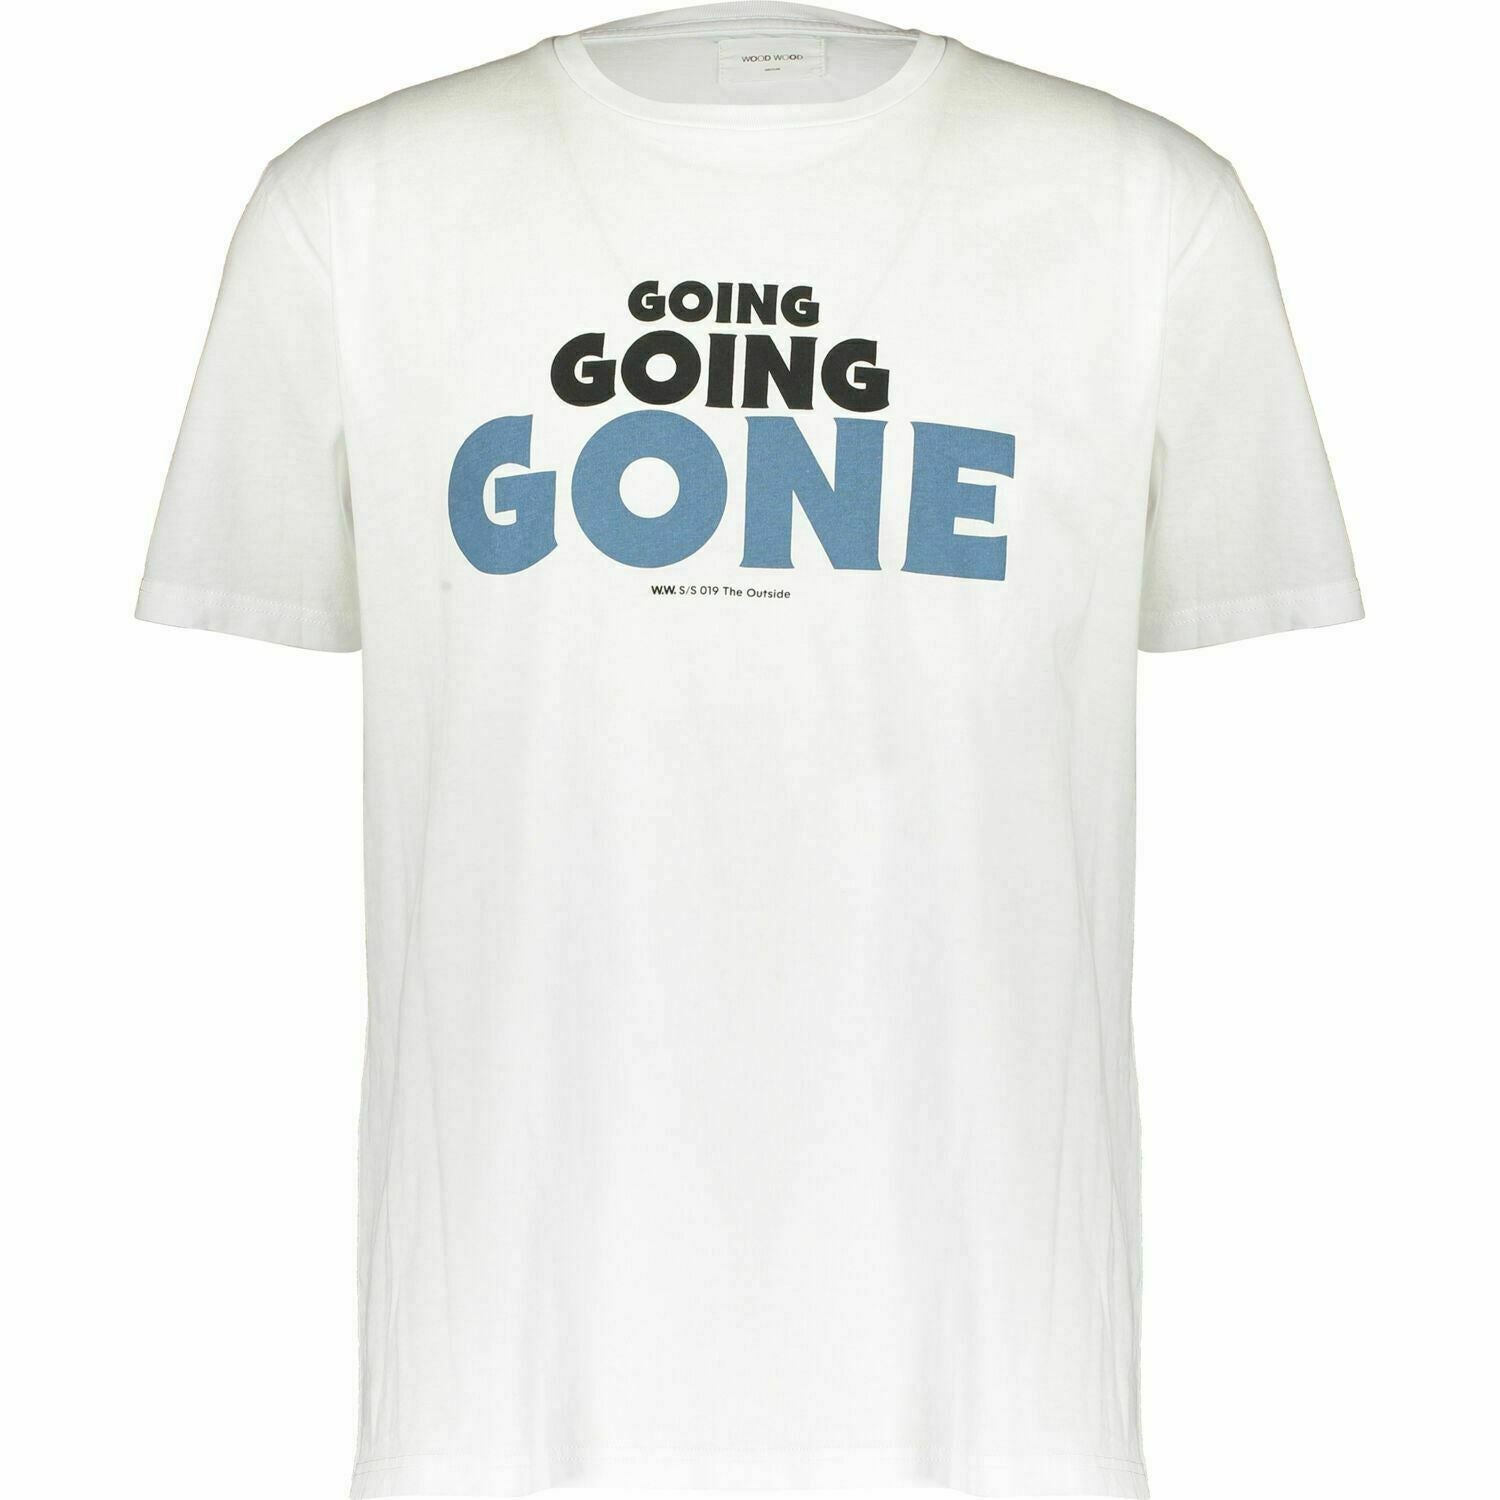 WOOD WOOD Men's "Going Going Gone" Cotton T-shirt, White, size M